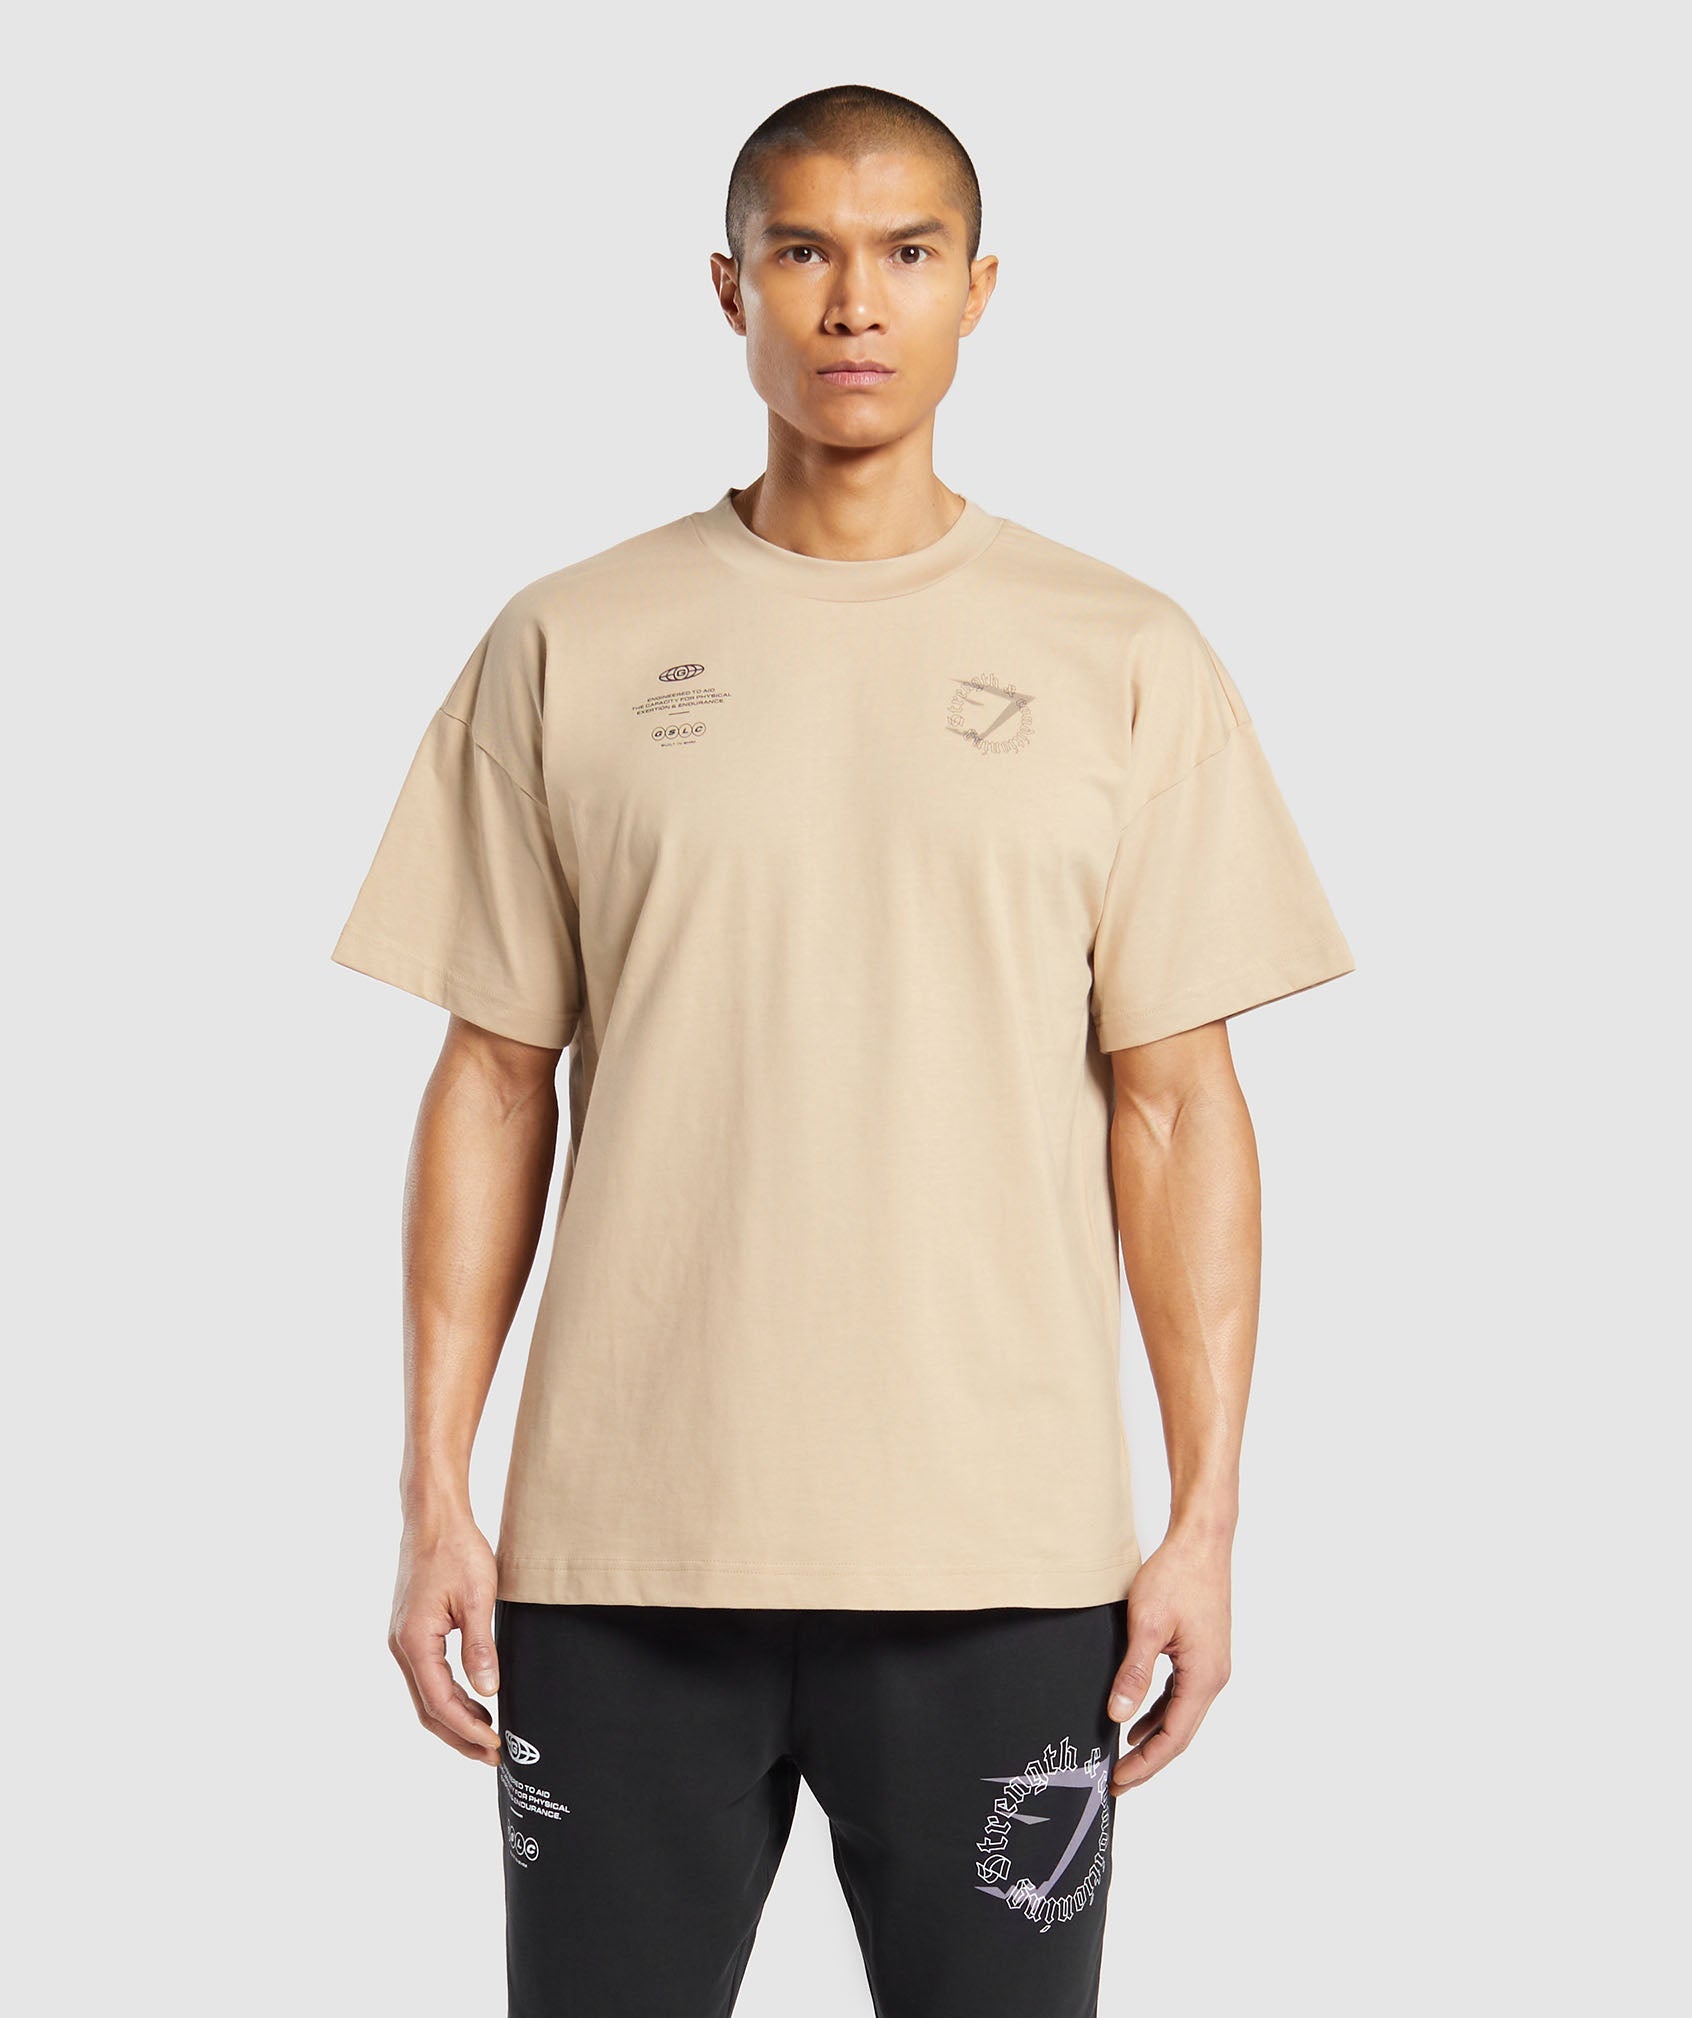 Strength and Conditioning T-Shirt in Vanilla Beige - view 2